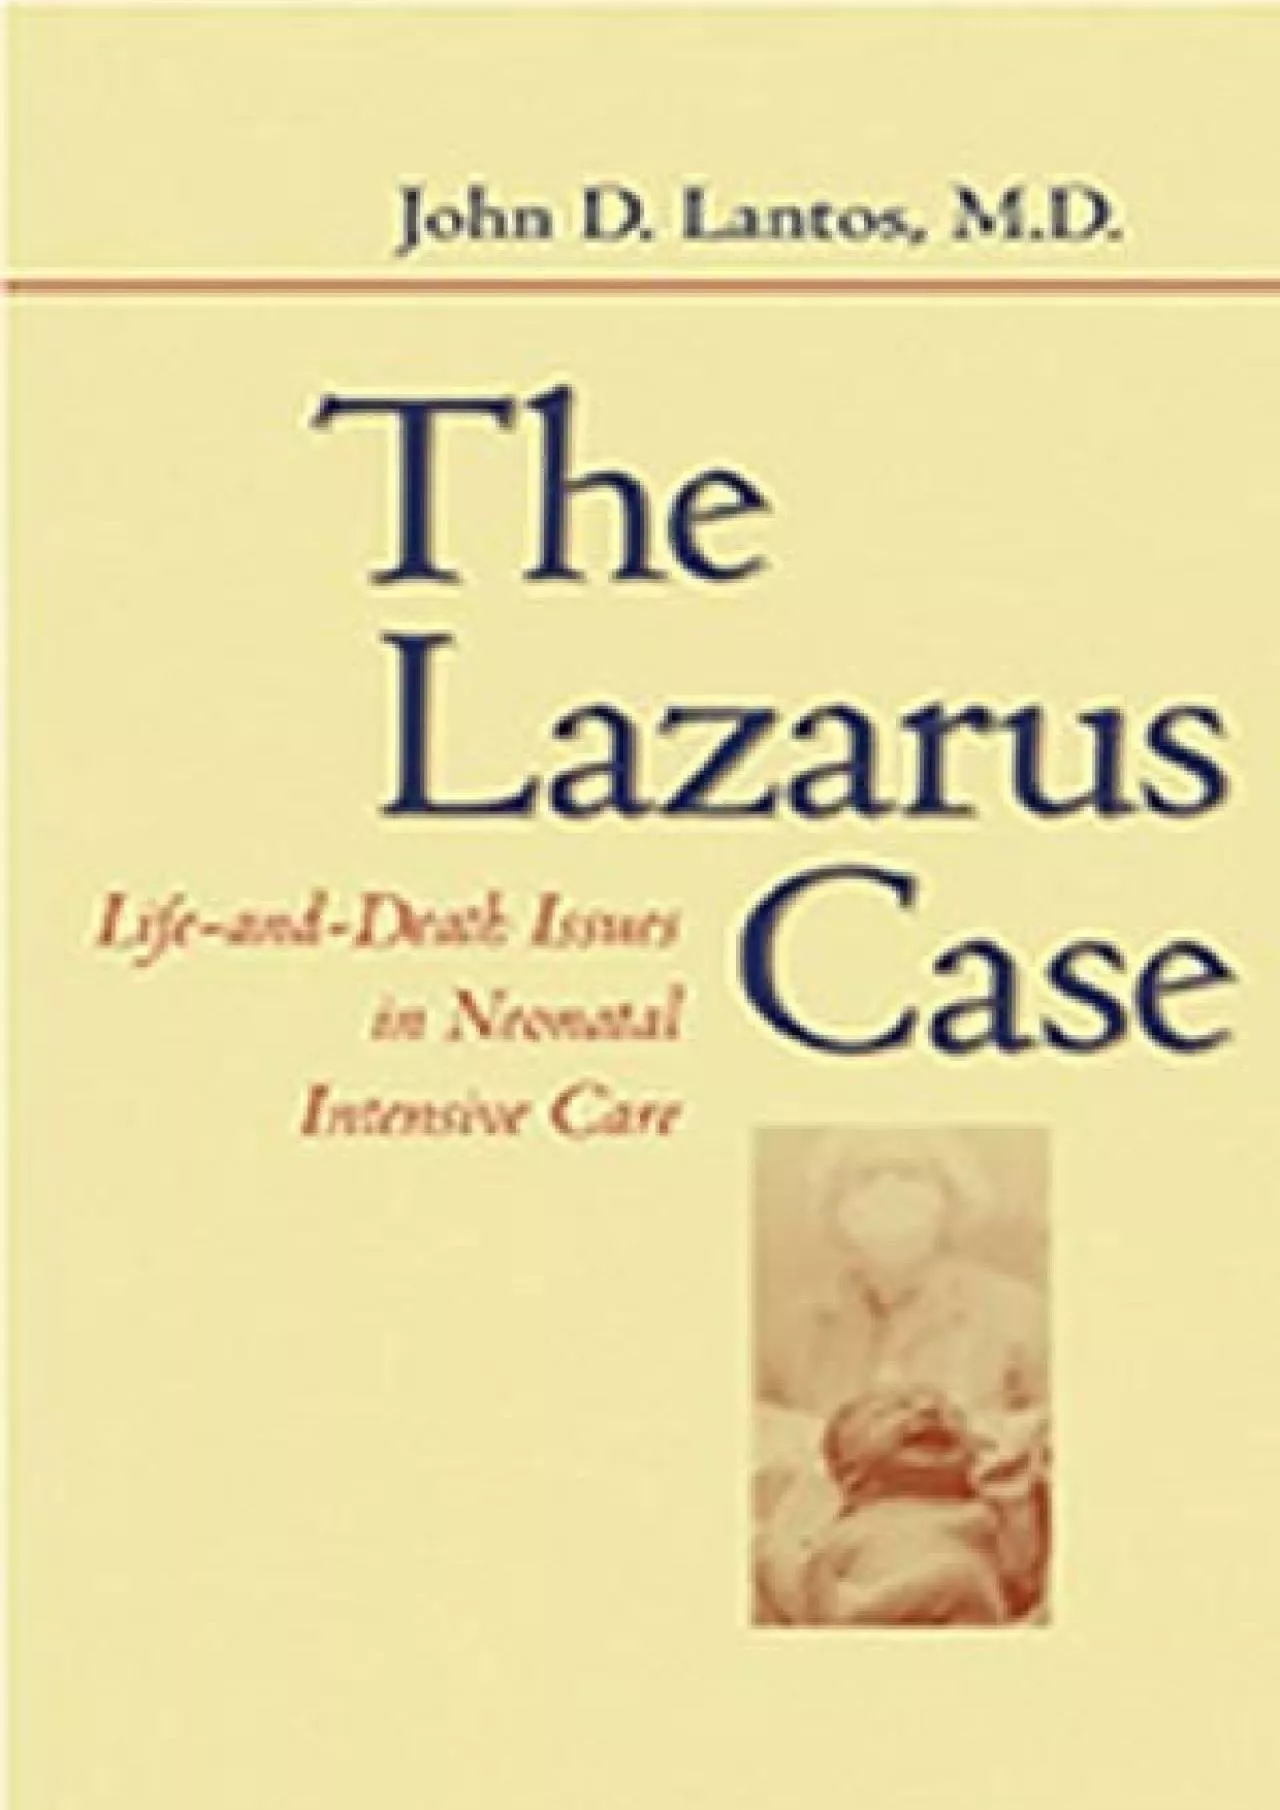 (BOOK)-The Lazarus Case: Life-and-Death Issues in Neonatal Intensive Care (Medicine and